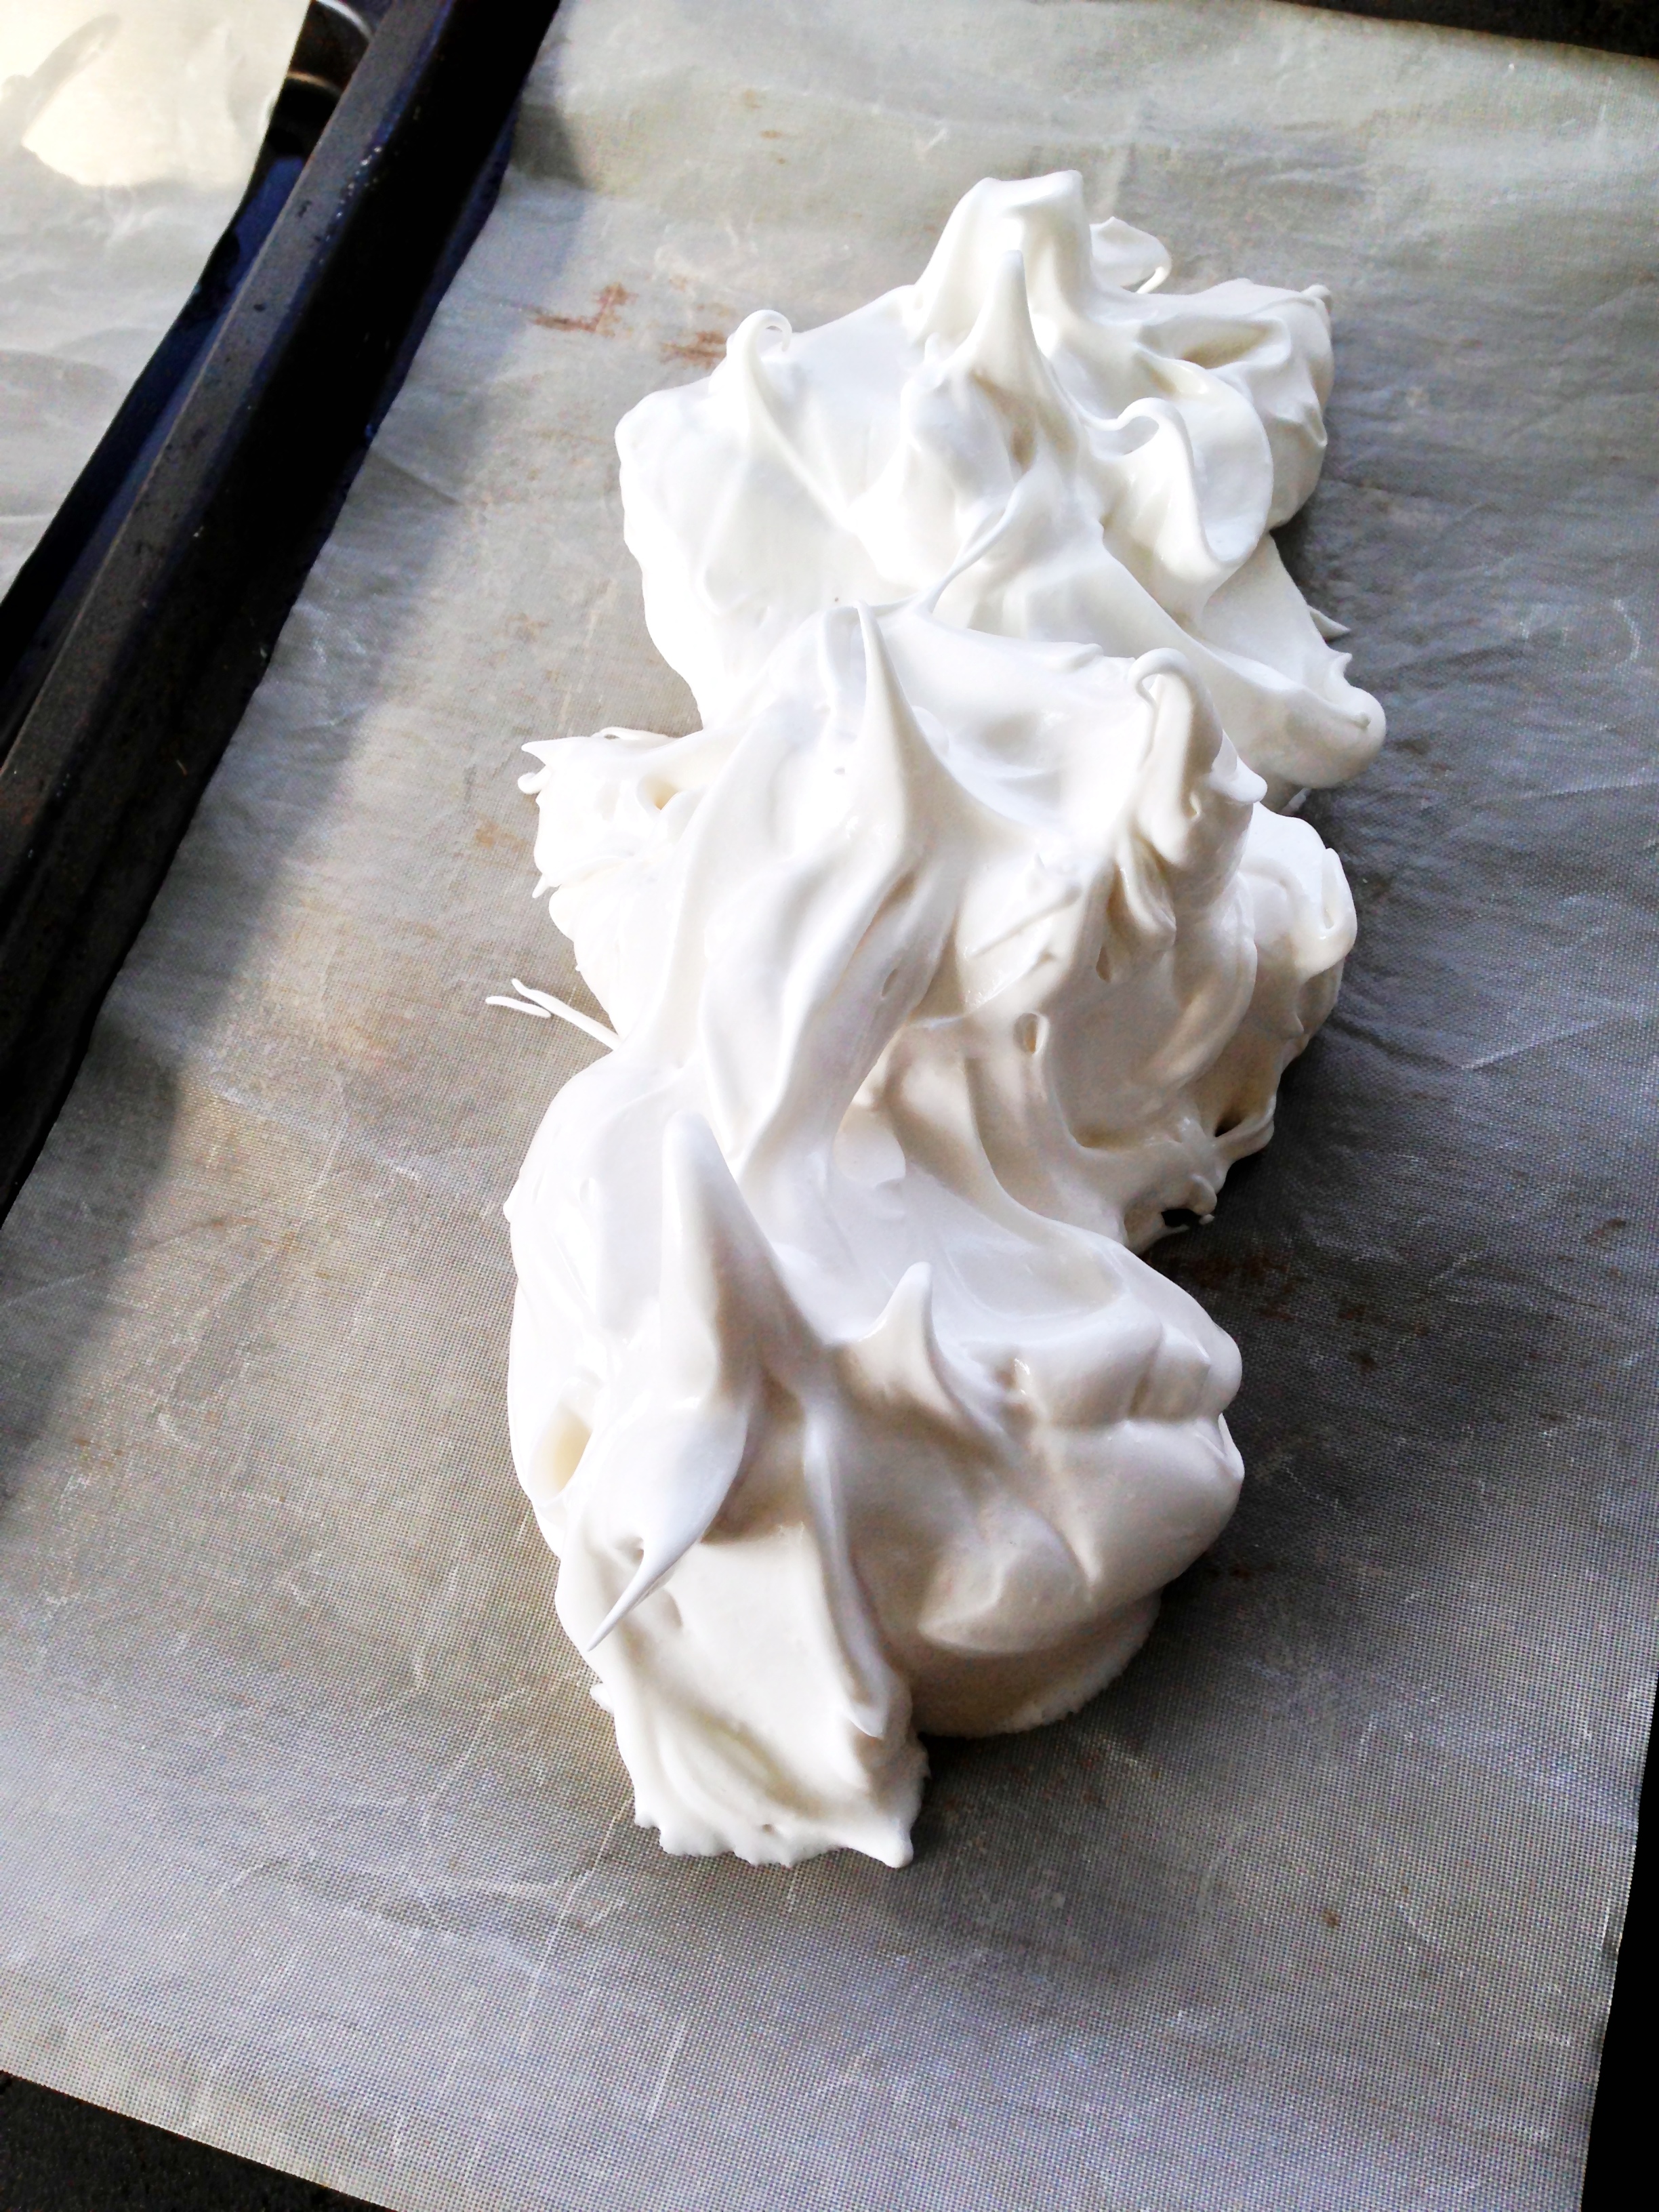 Meringue ready for oven